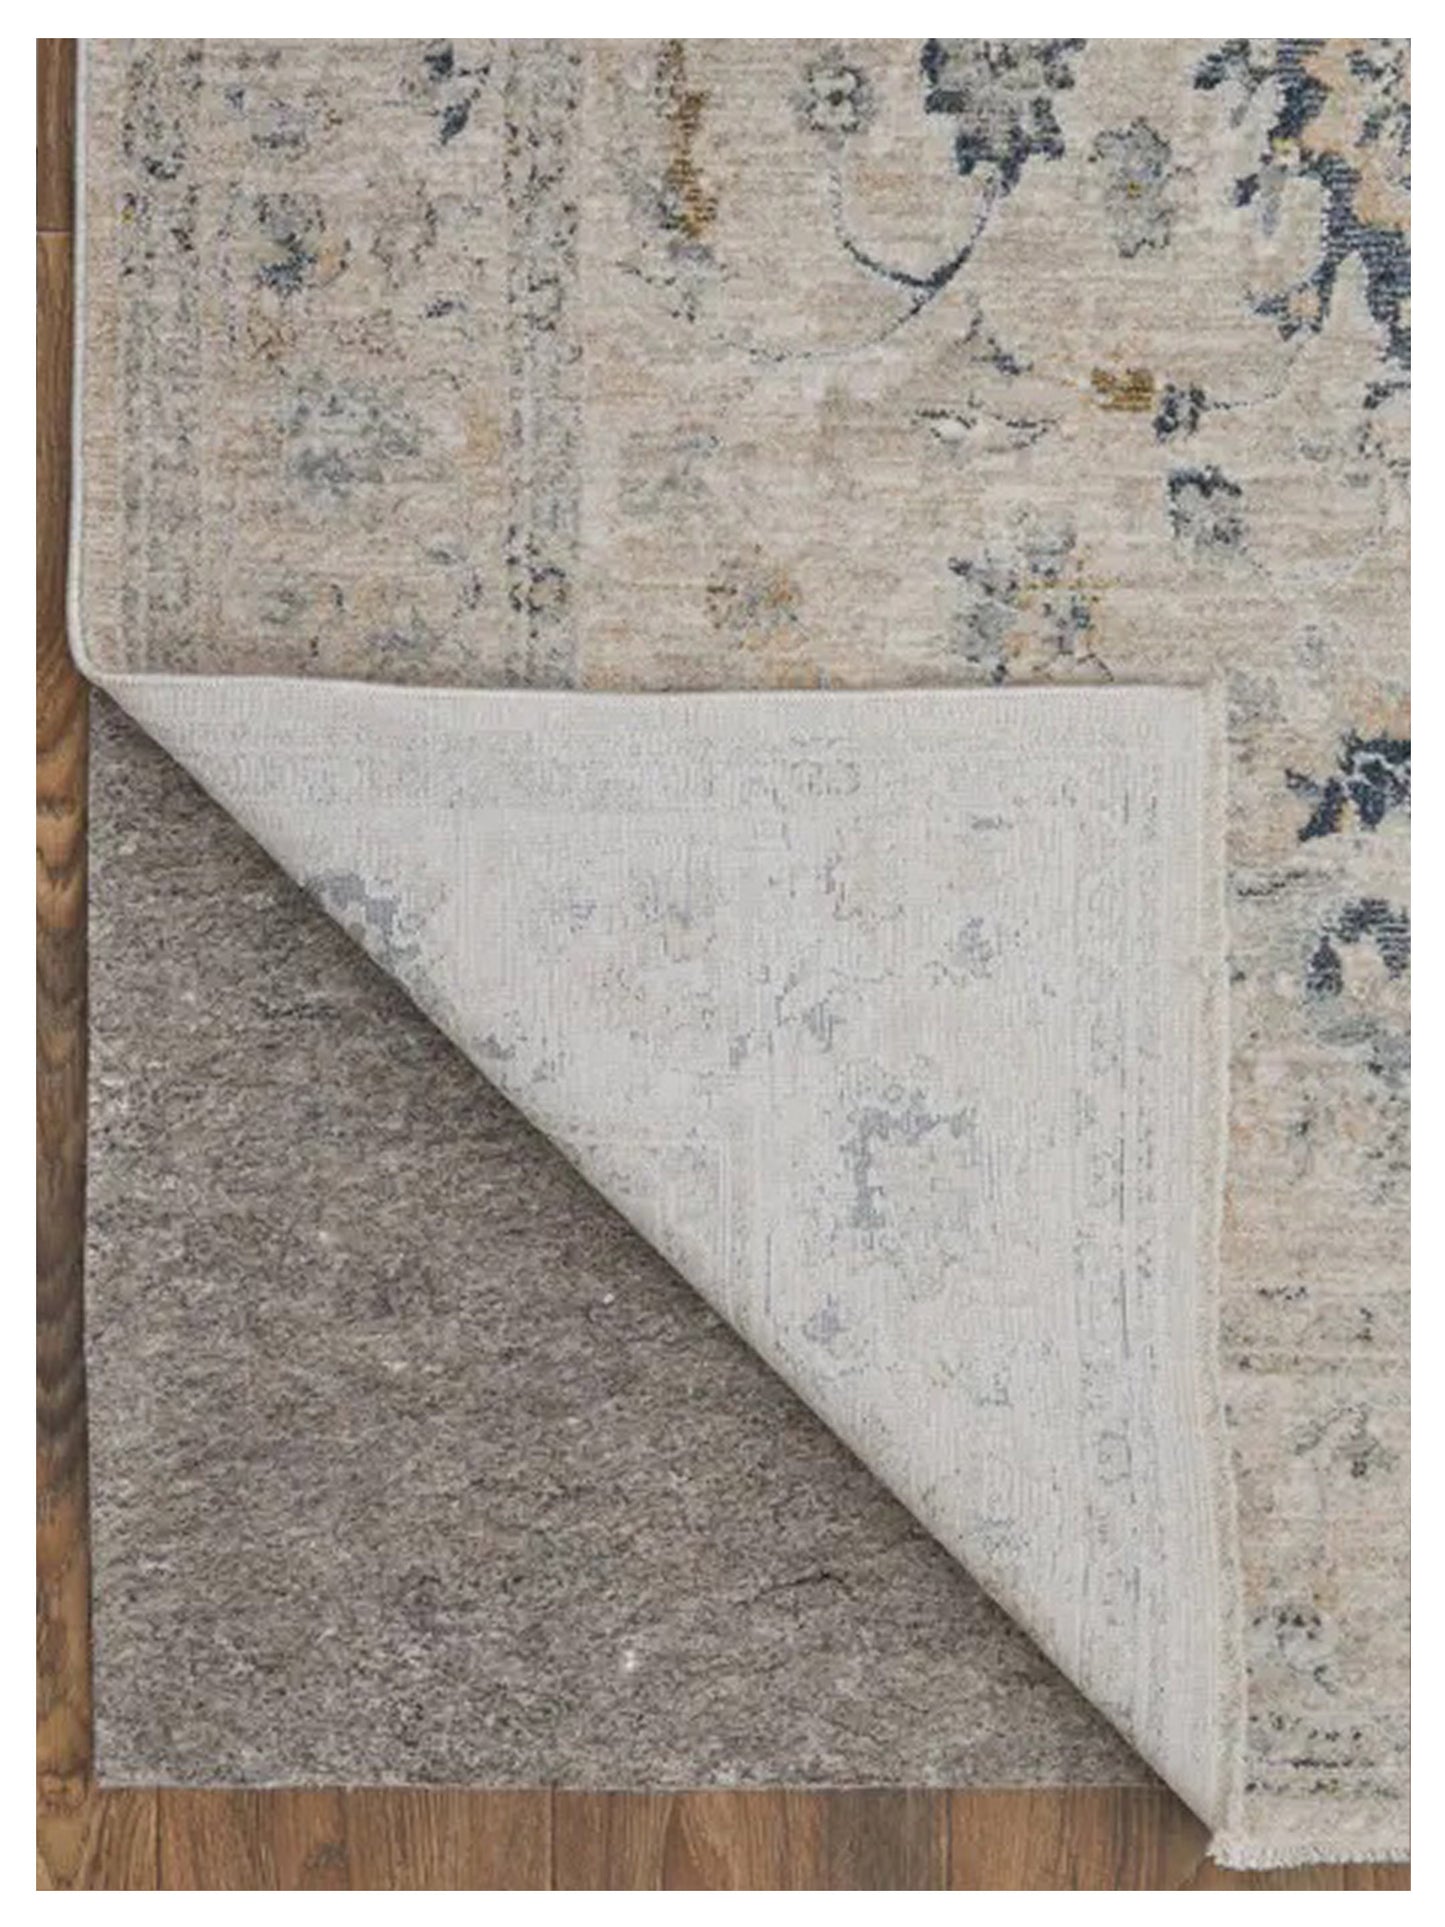 Feizy Pasha 39M7F Beige Blue Traditional Machinemade Rug